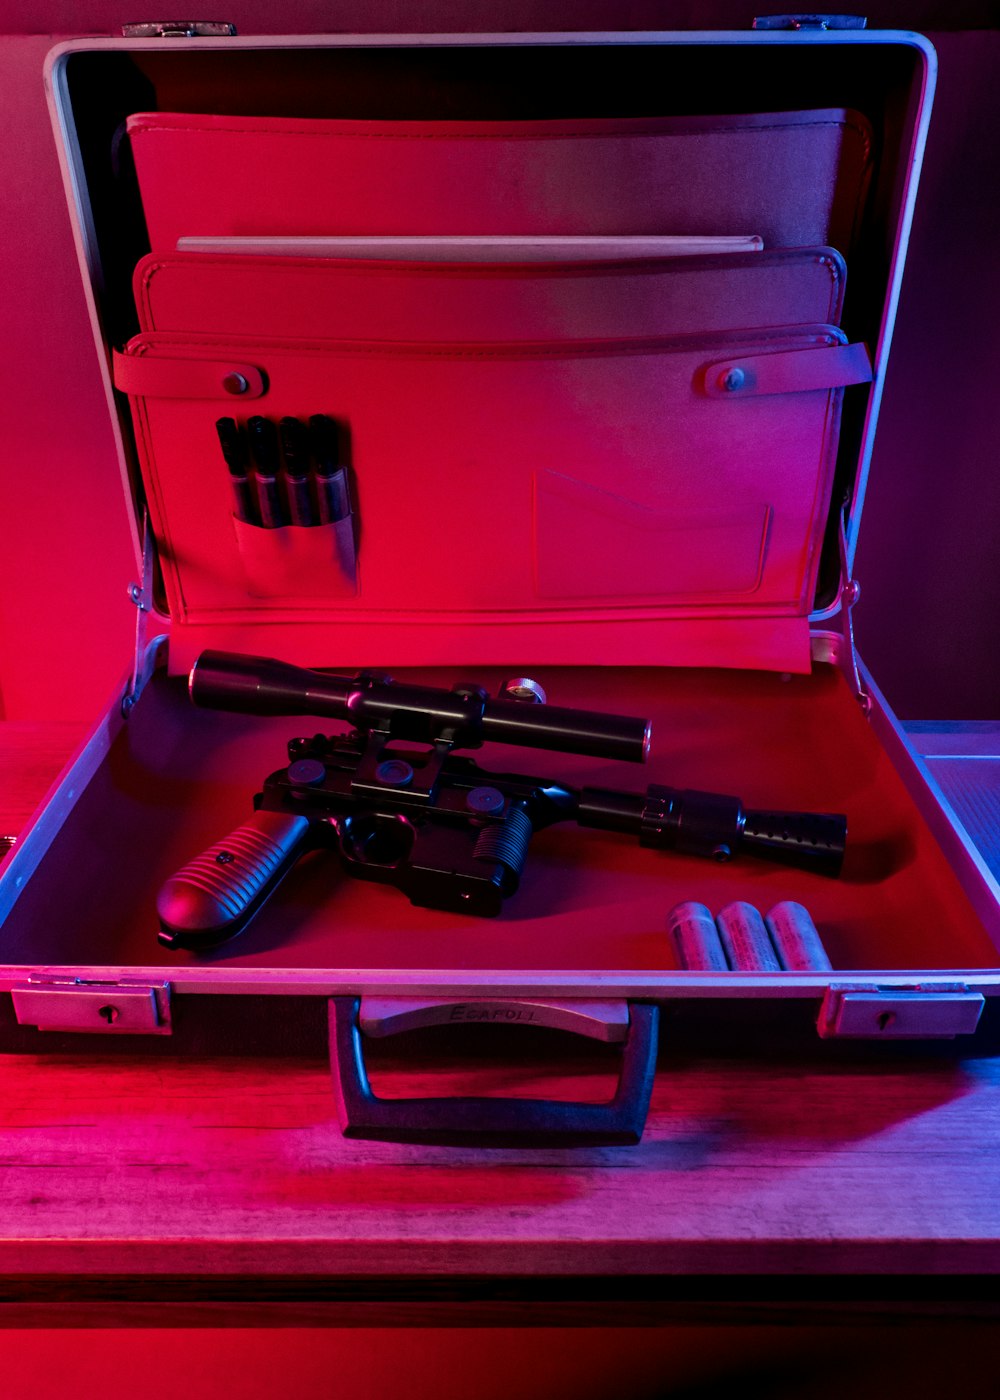 black and red semi automatic pistol in red plastic container